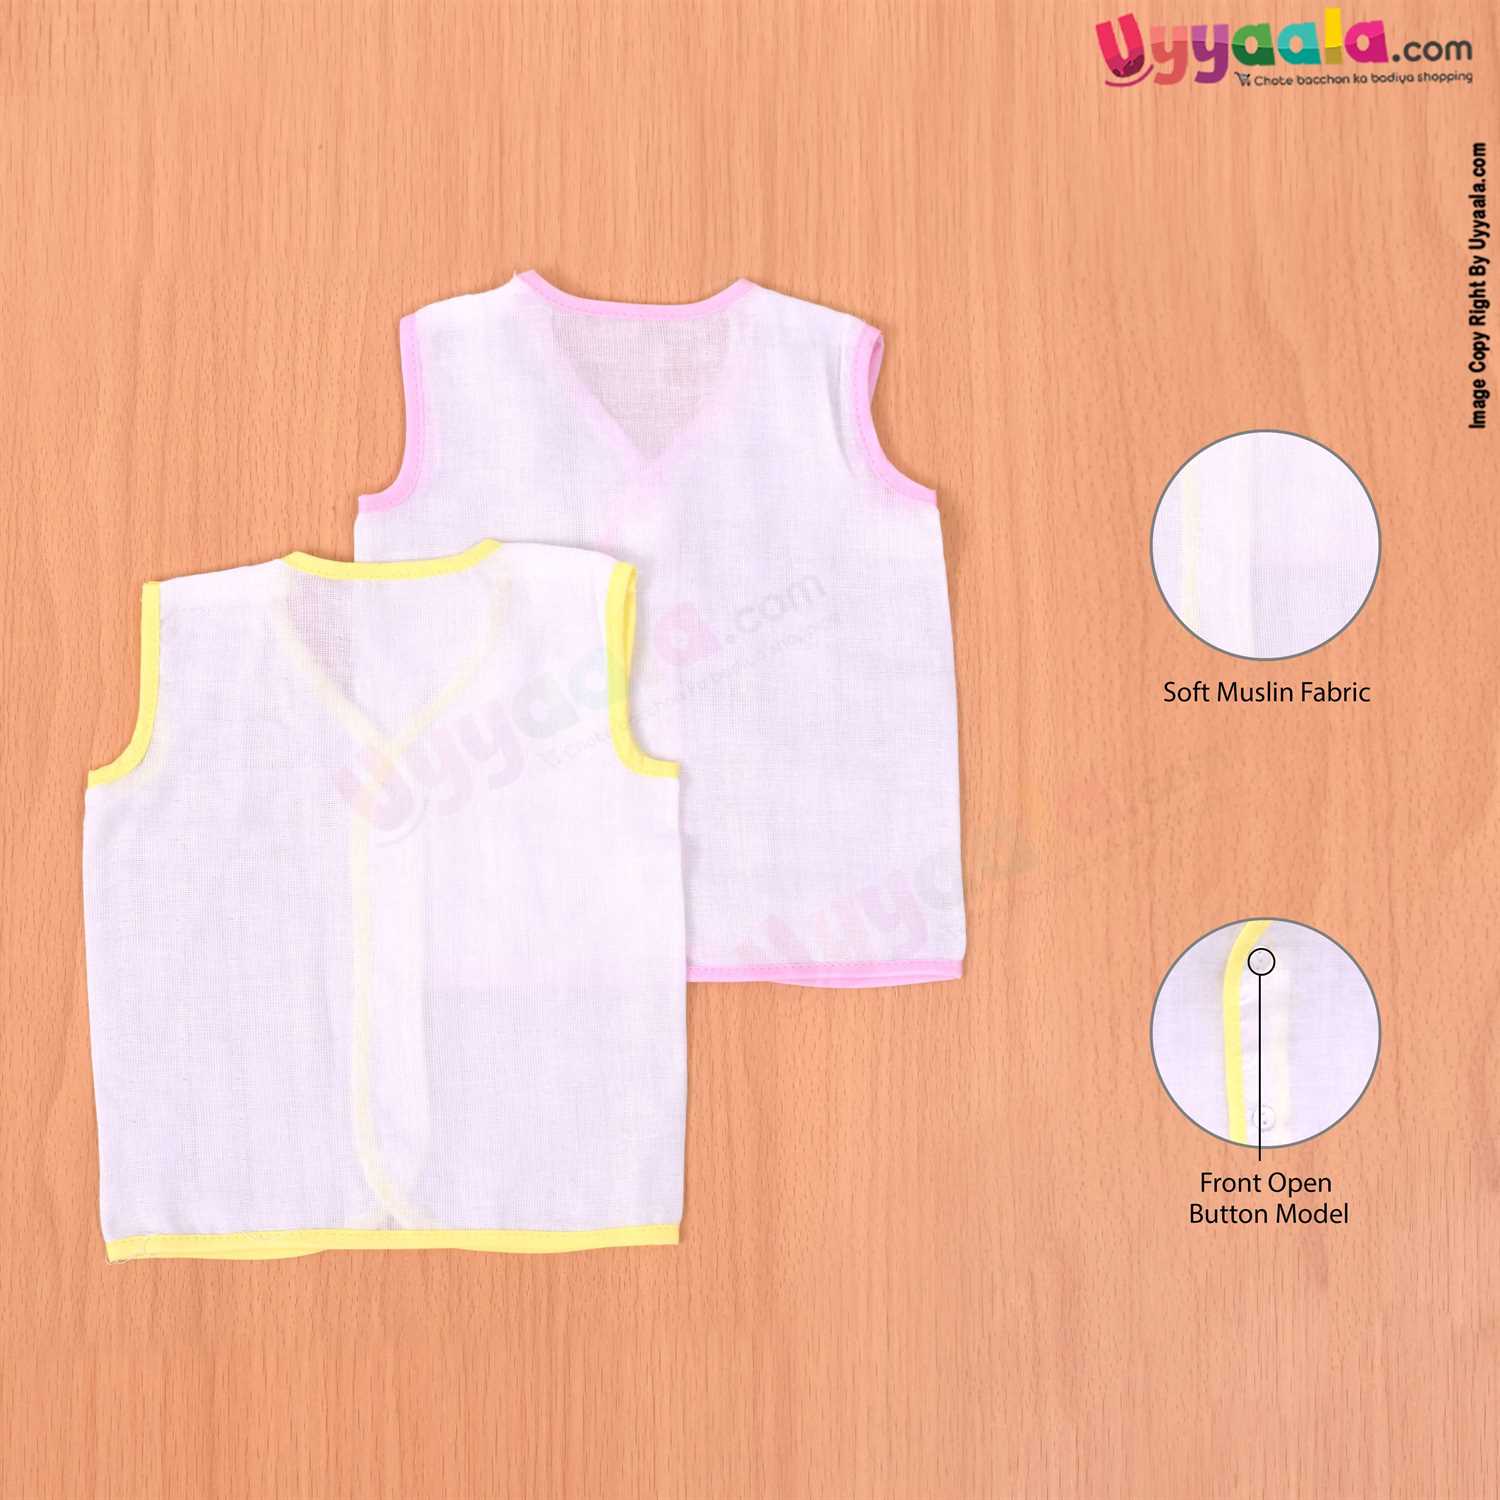 POLAR CUBS Sleeveless Baby Jabla Set, Front Opening Button Model, Premium Quality Muslin Cotton Baby Wear, 2 Pack - White with Yellow & Pink Borders